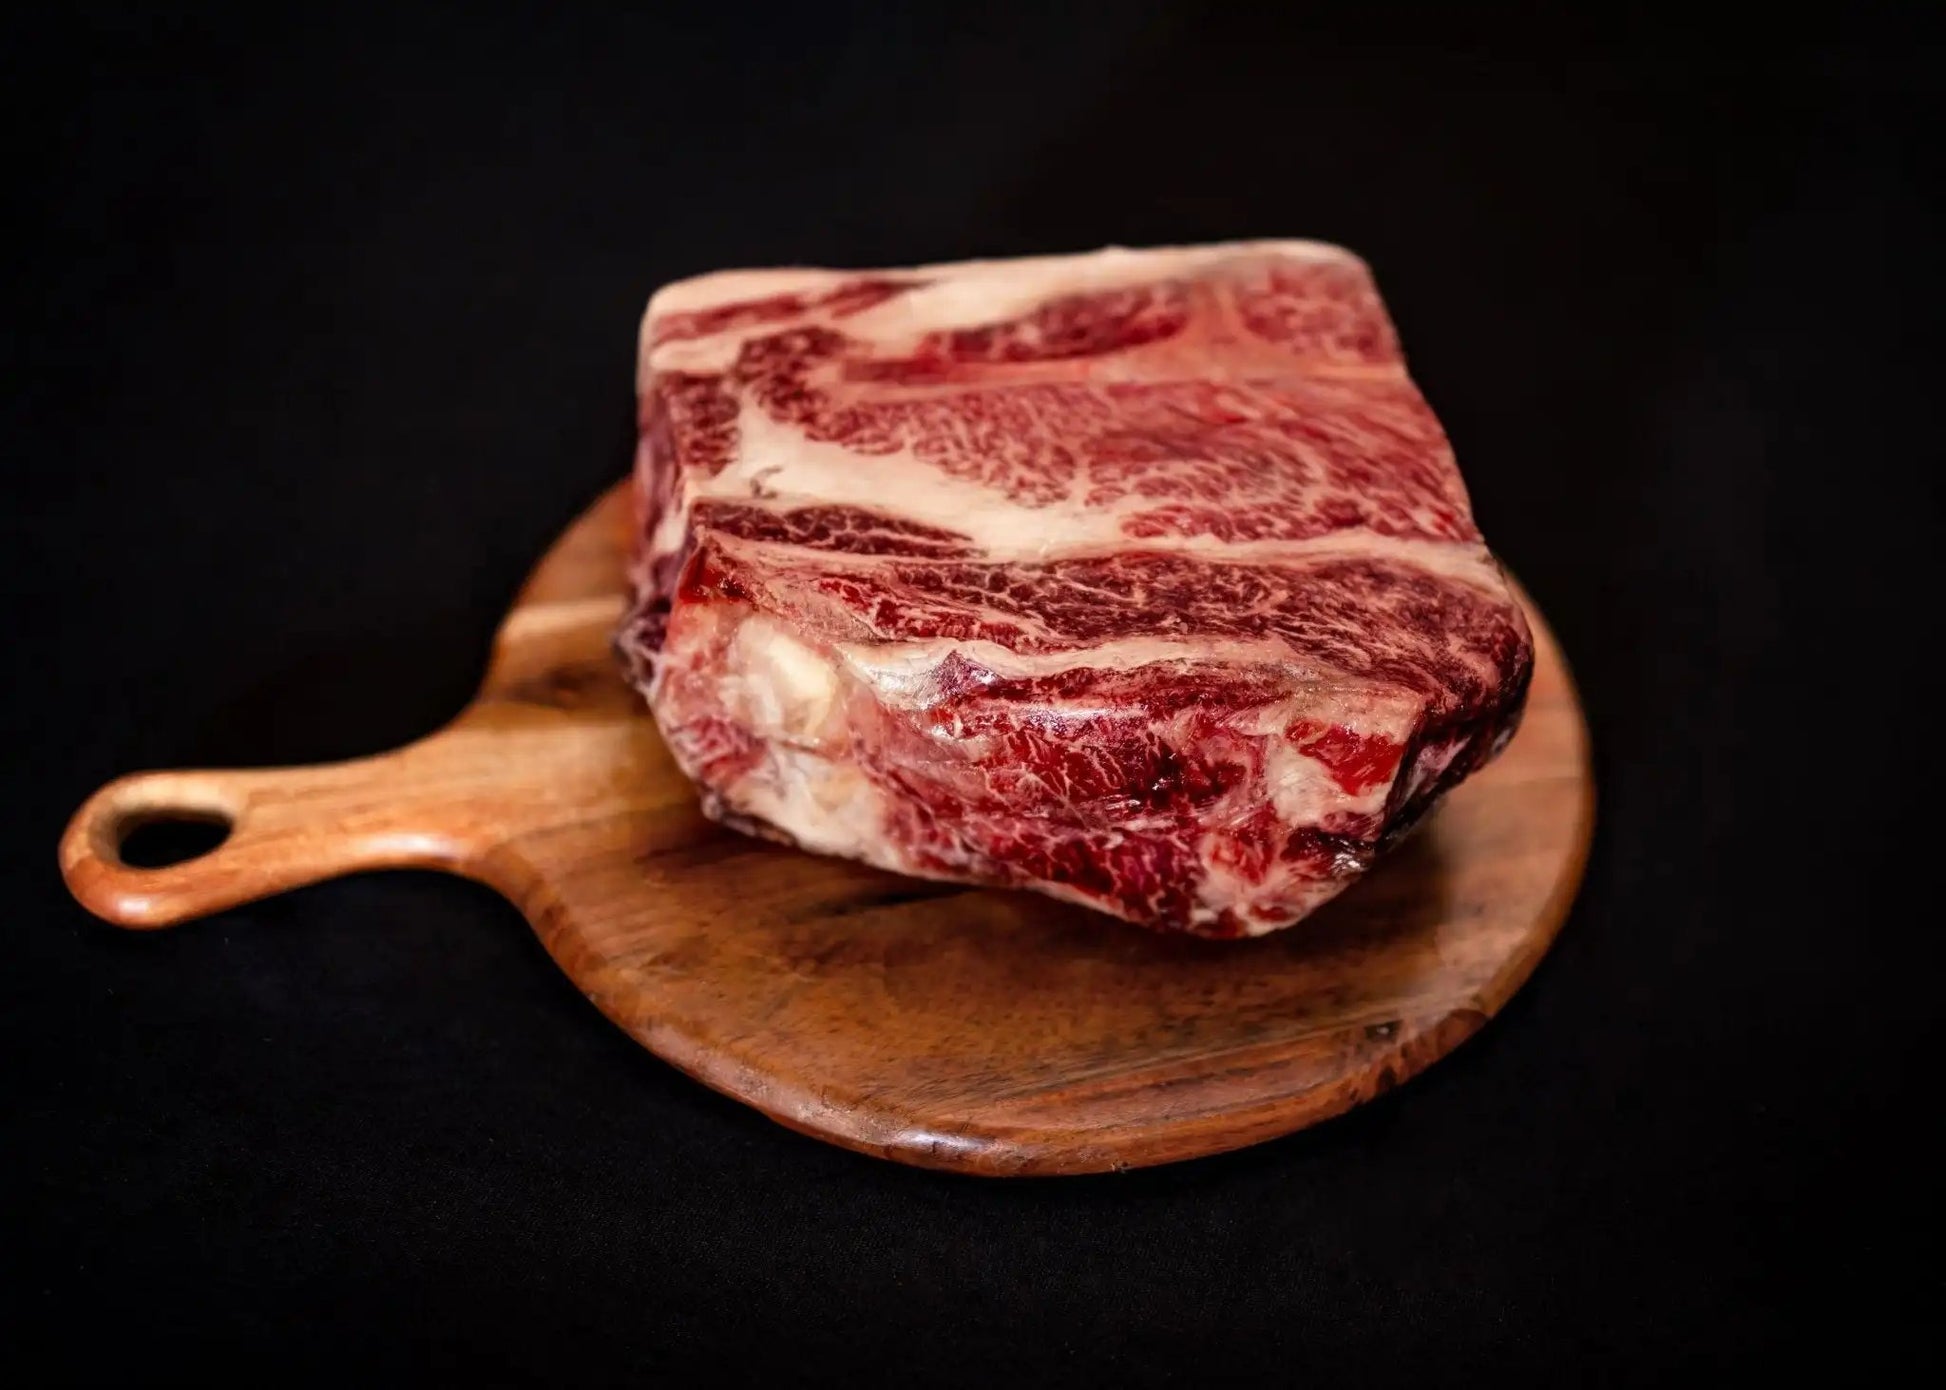 100% All-Natural Grass-Fed Pasture-Raised Wagyu Chuck Roast - The Hufeisen-Ranch (WYO Wagyu)